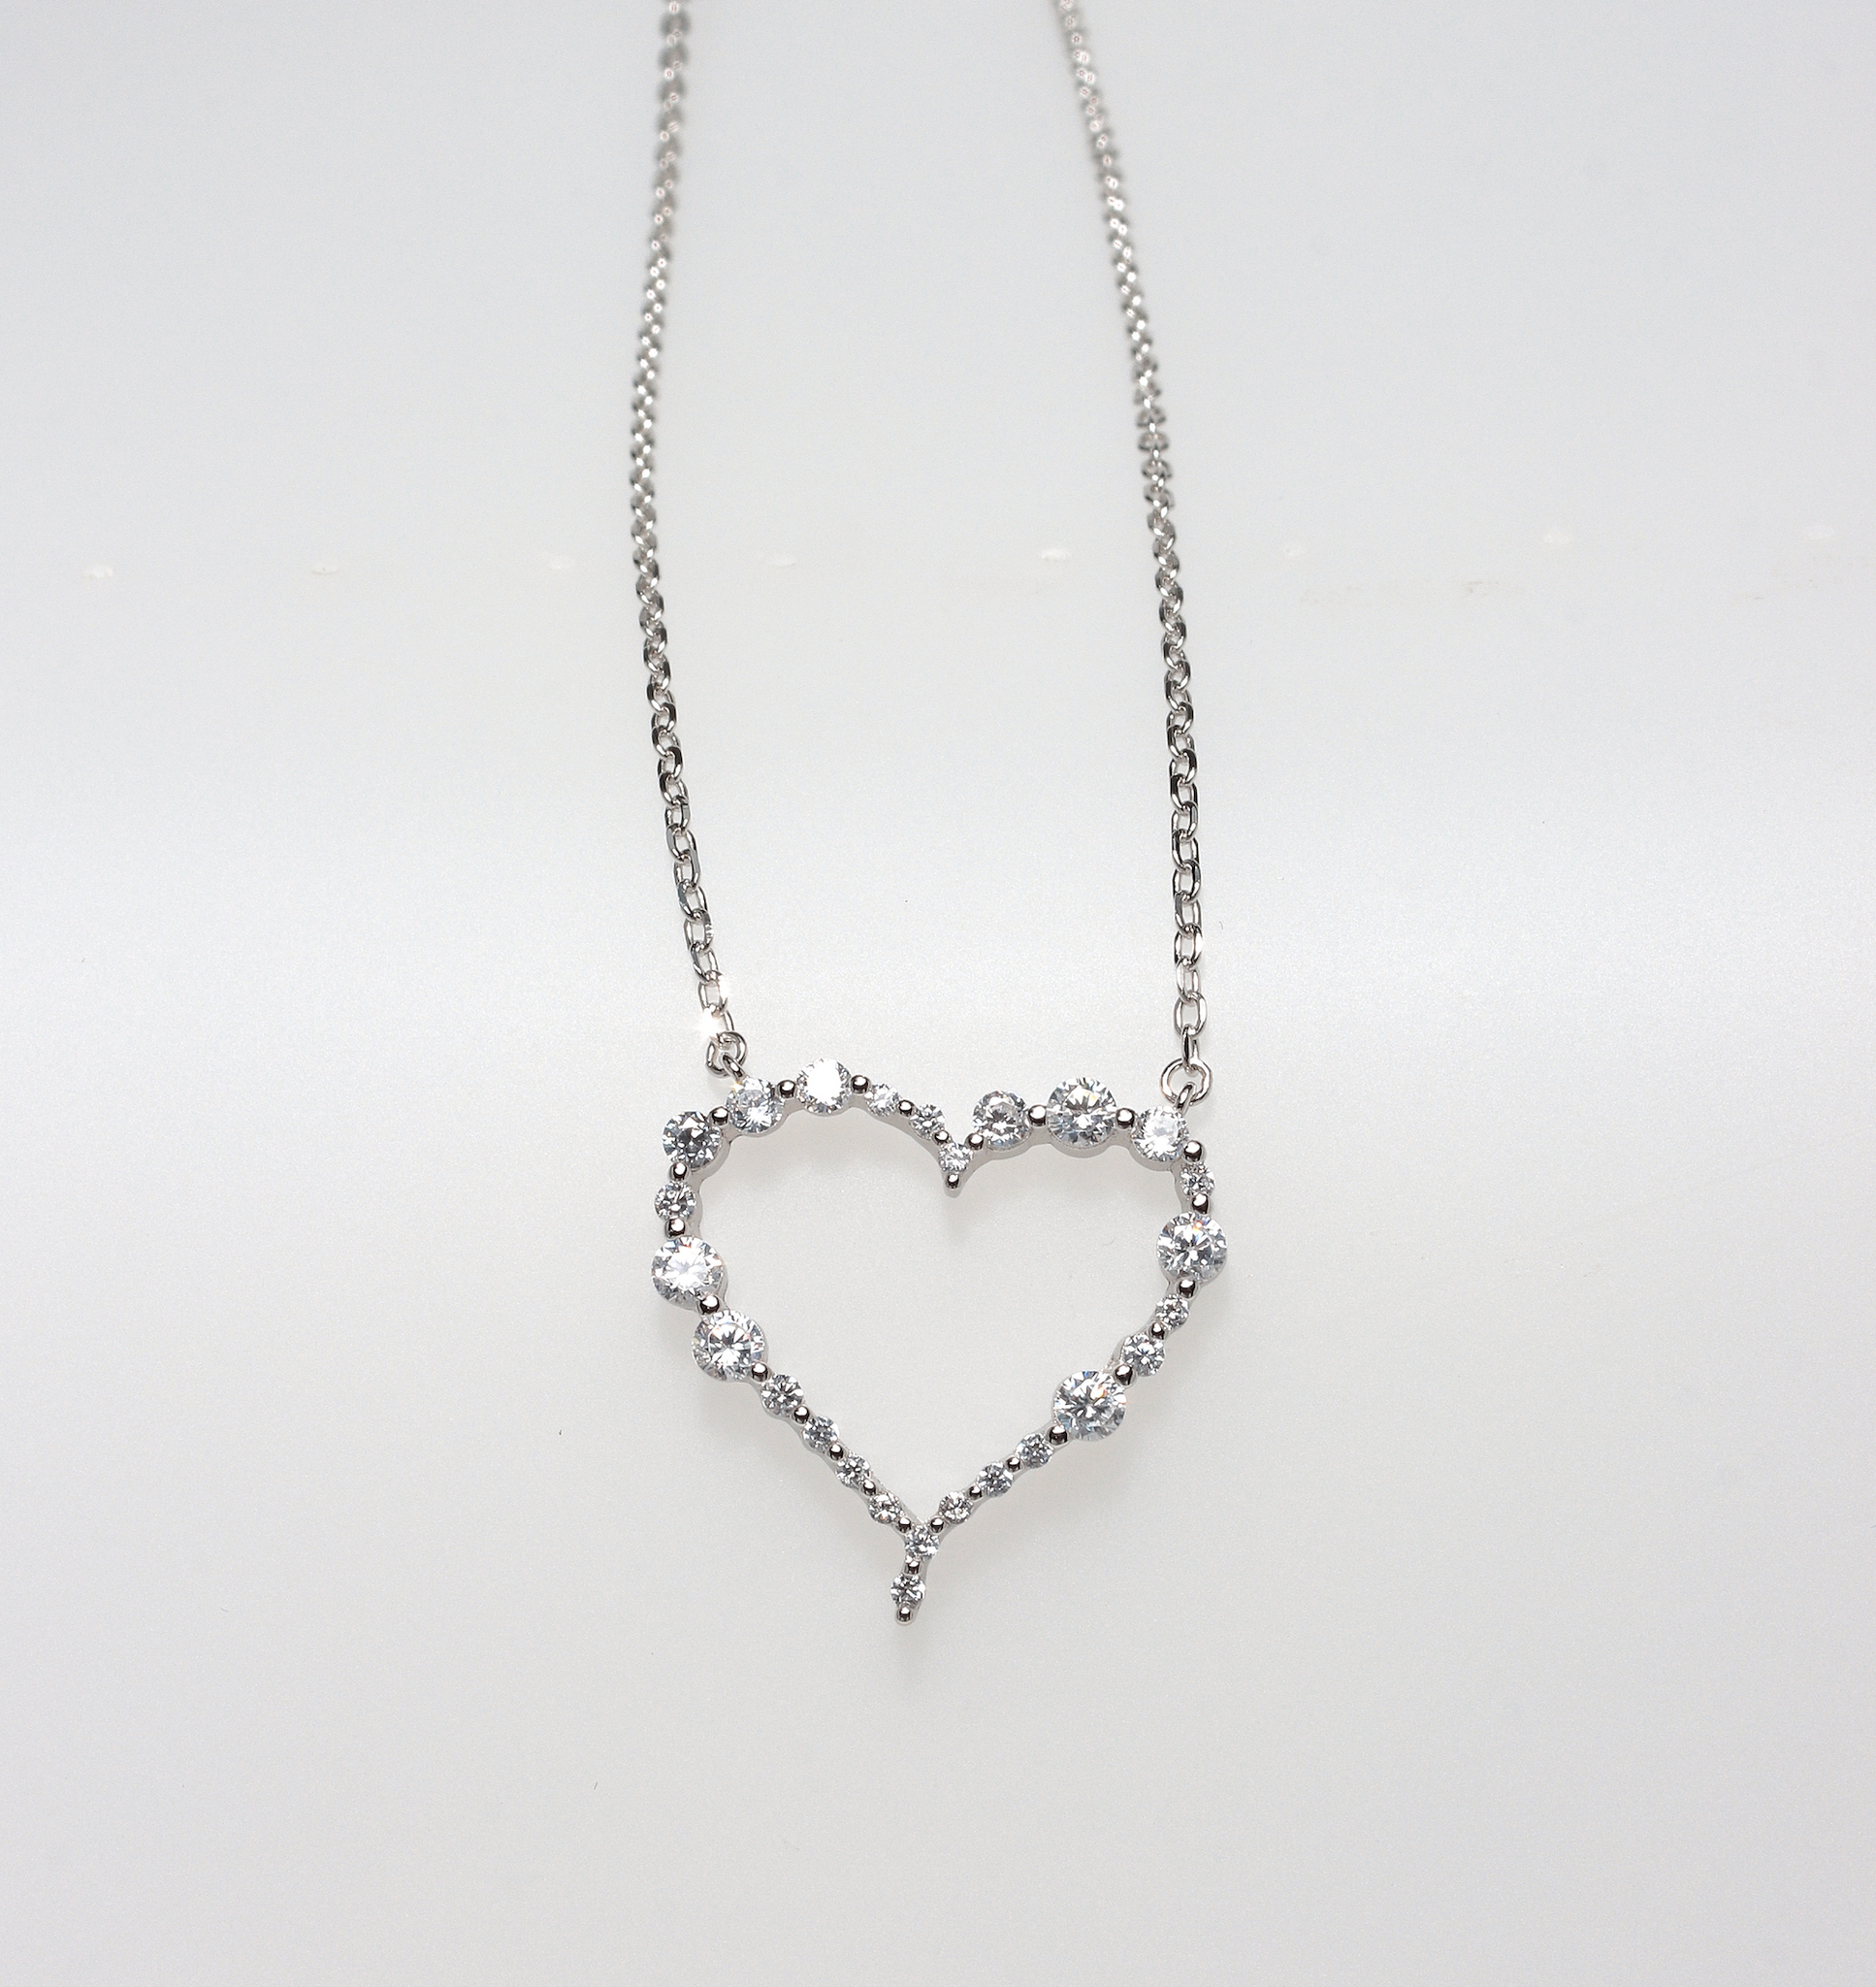 PARIS HEART ROUND STONES WHITE GOLD 925 SILVER NECKLACE BY ANITA BRAND